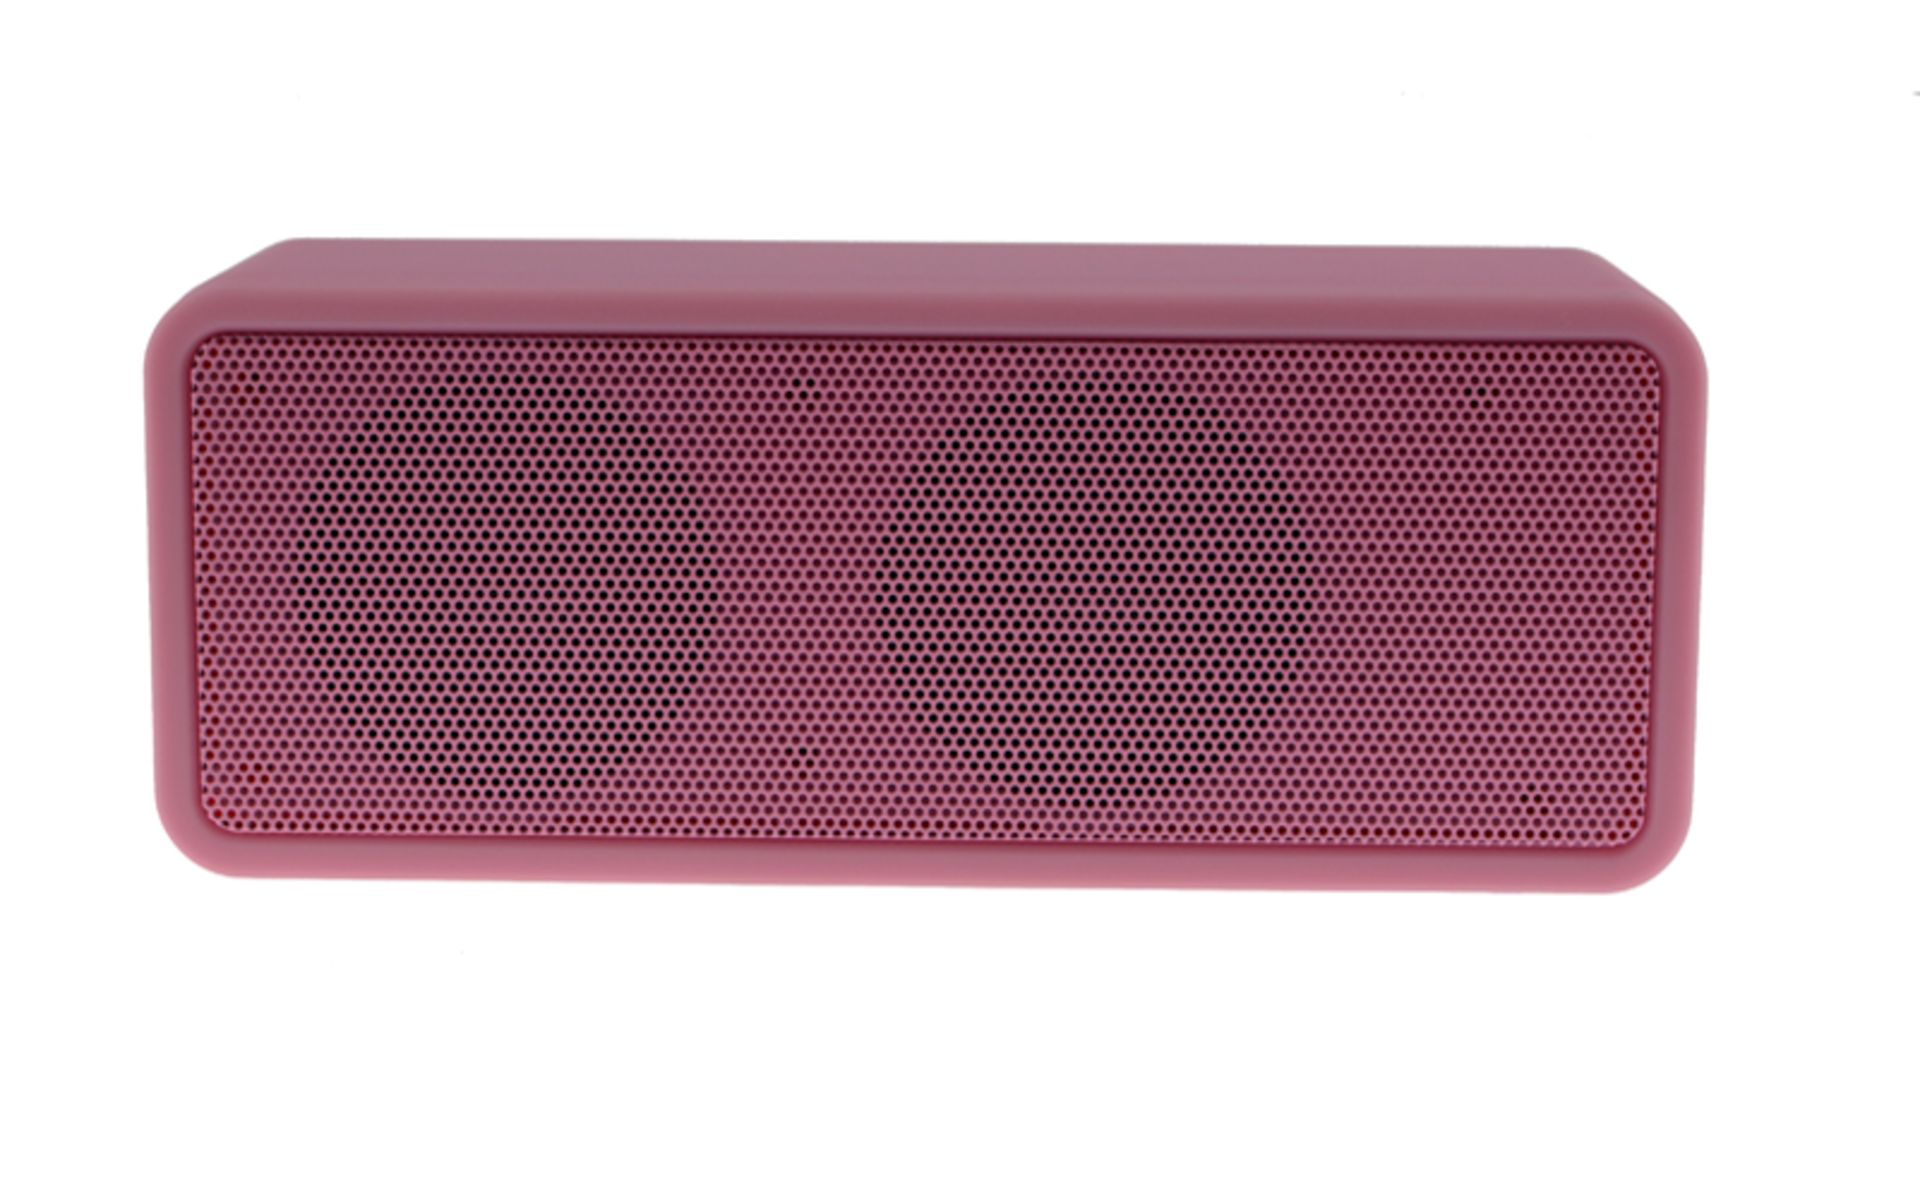 V Brand New Eon-Earz Wireless Bluetooth Speaker With Super Hi-Fi Audio Compatible with Mobile